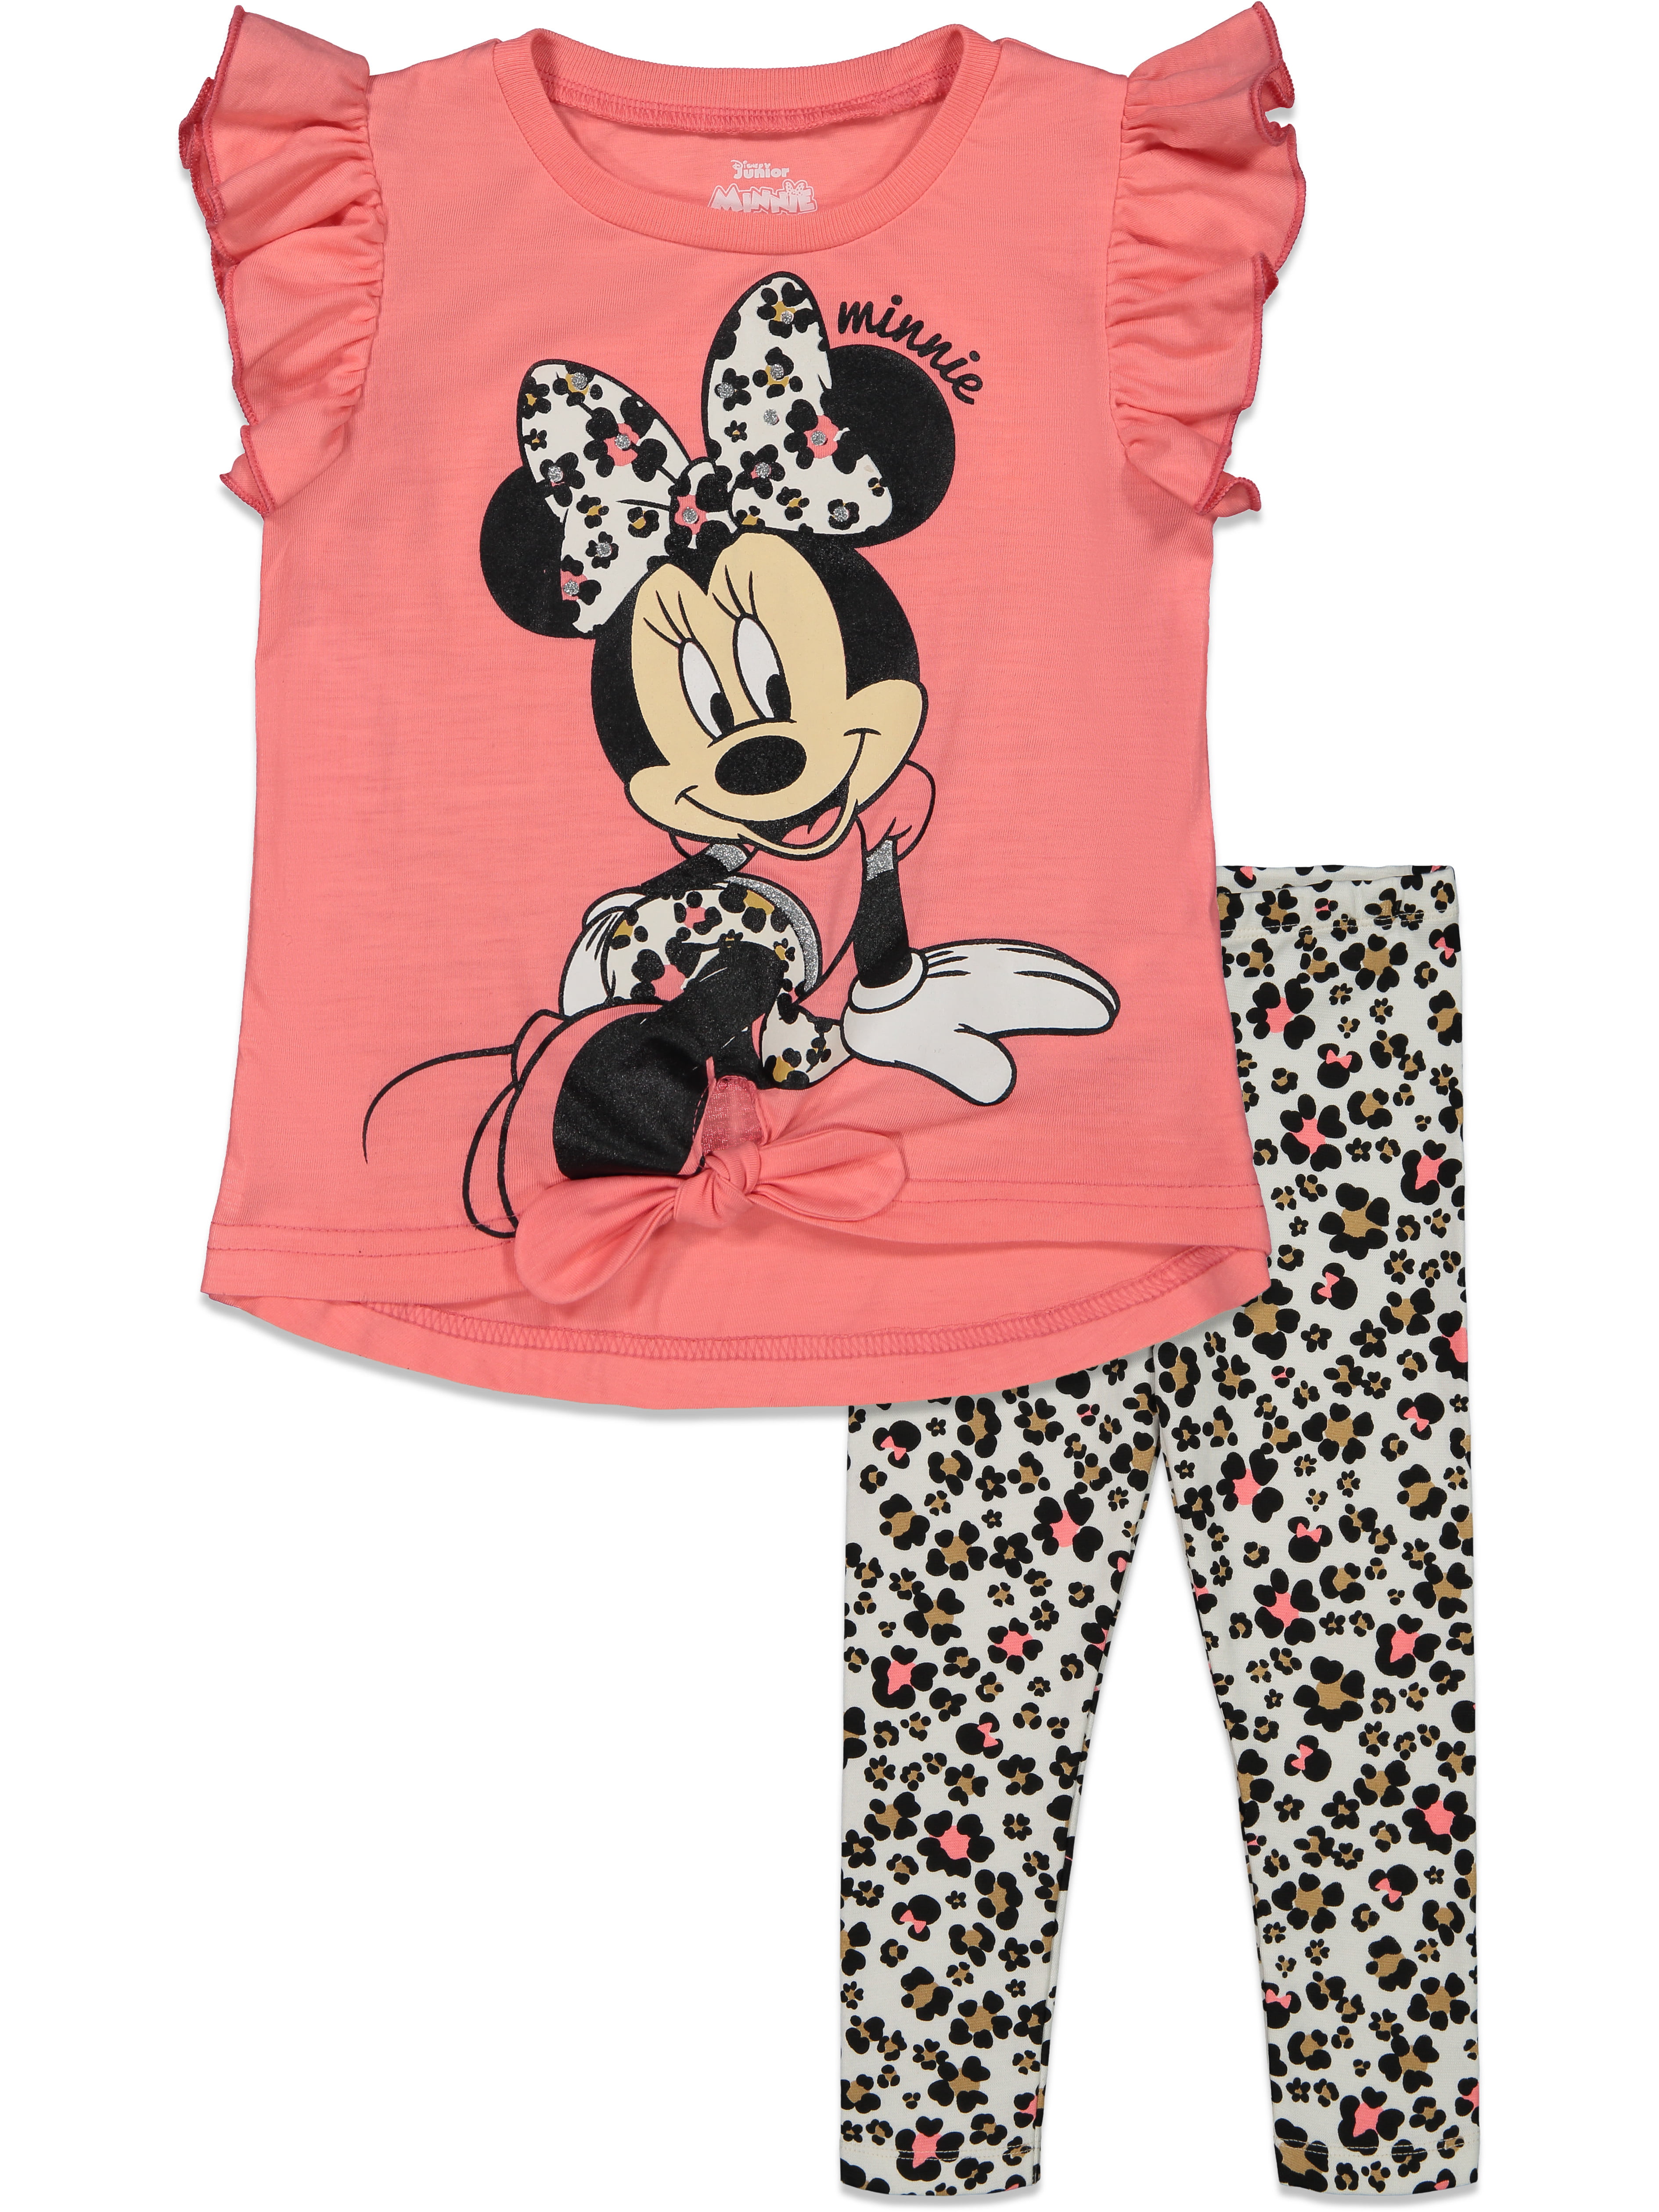 Disney Baby Toddler Minnie Mouse T-shirt Top Pink 3T 